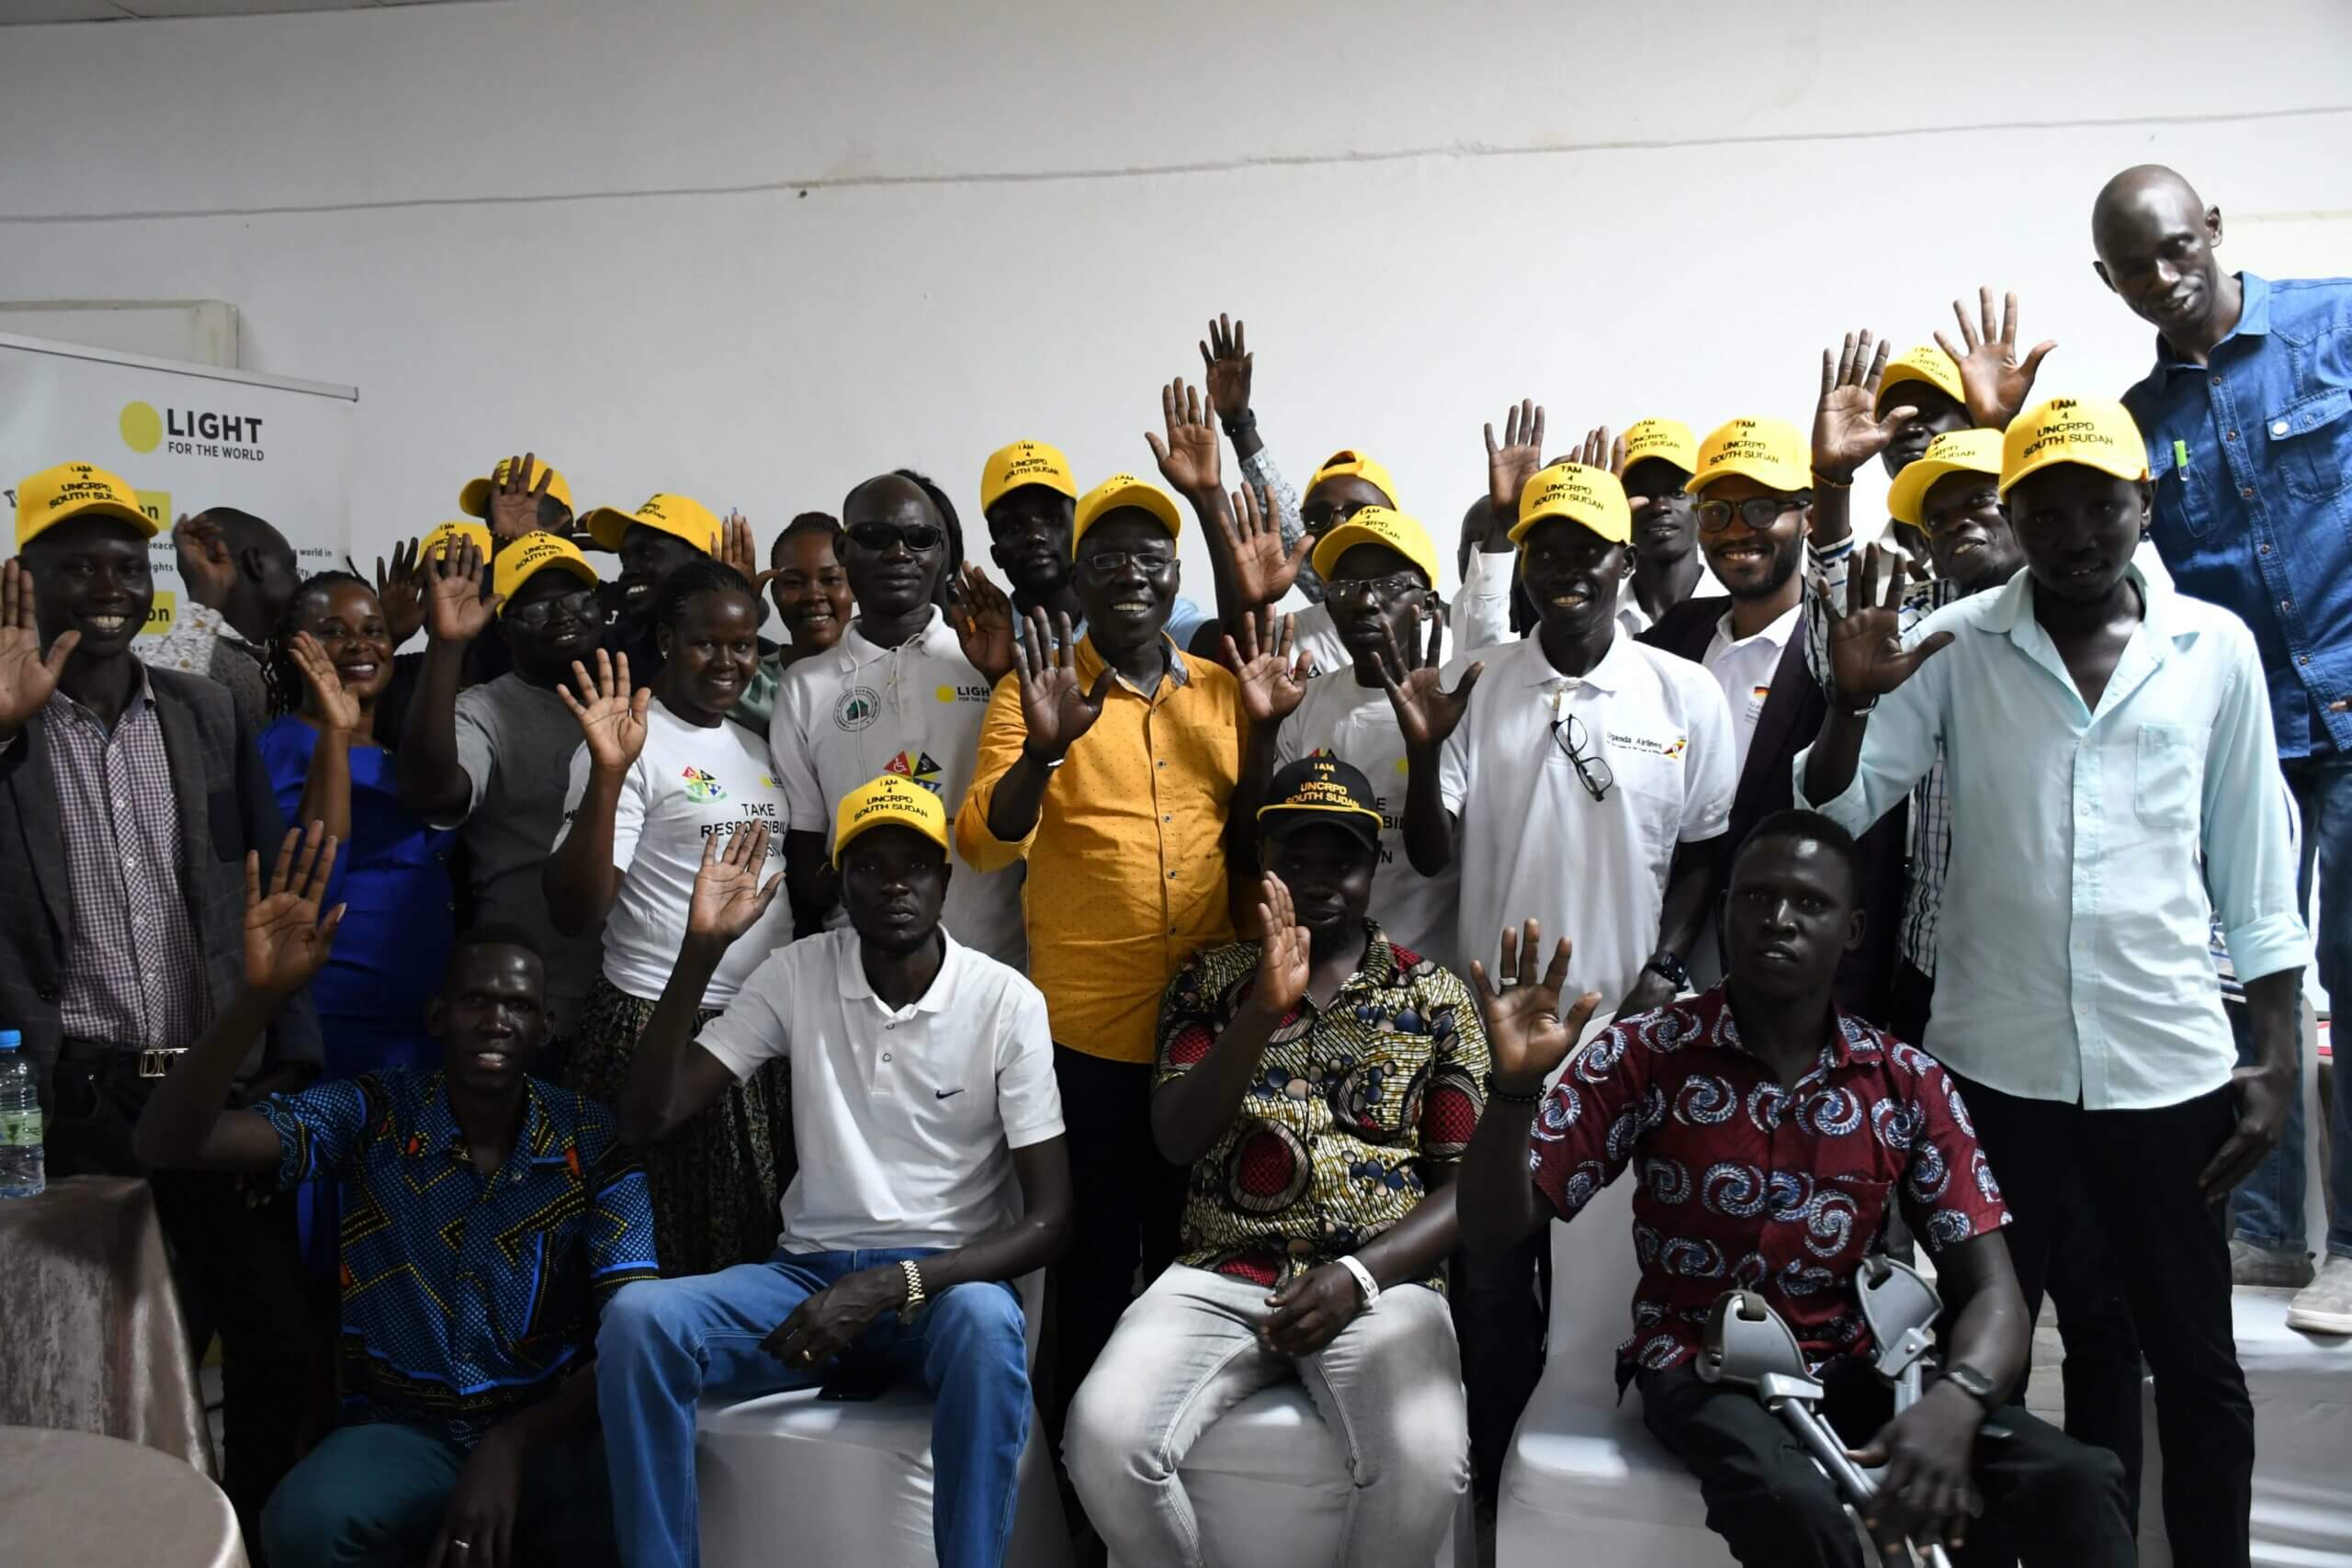 Journalists from South Sudan attend a training session on disability inclusive language by Light for the World. There are about 20 journalists, most are smiling at the camera and waving. 